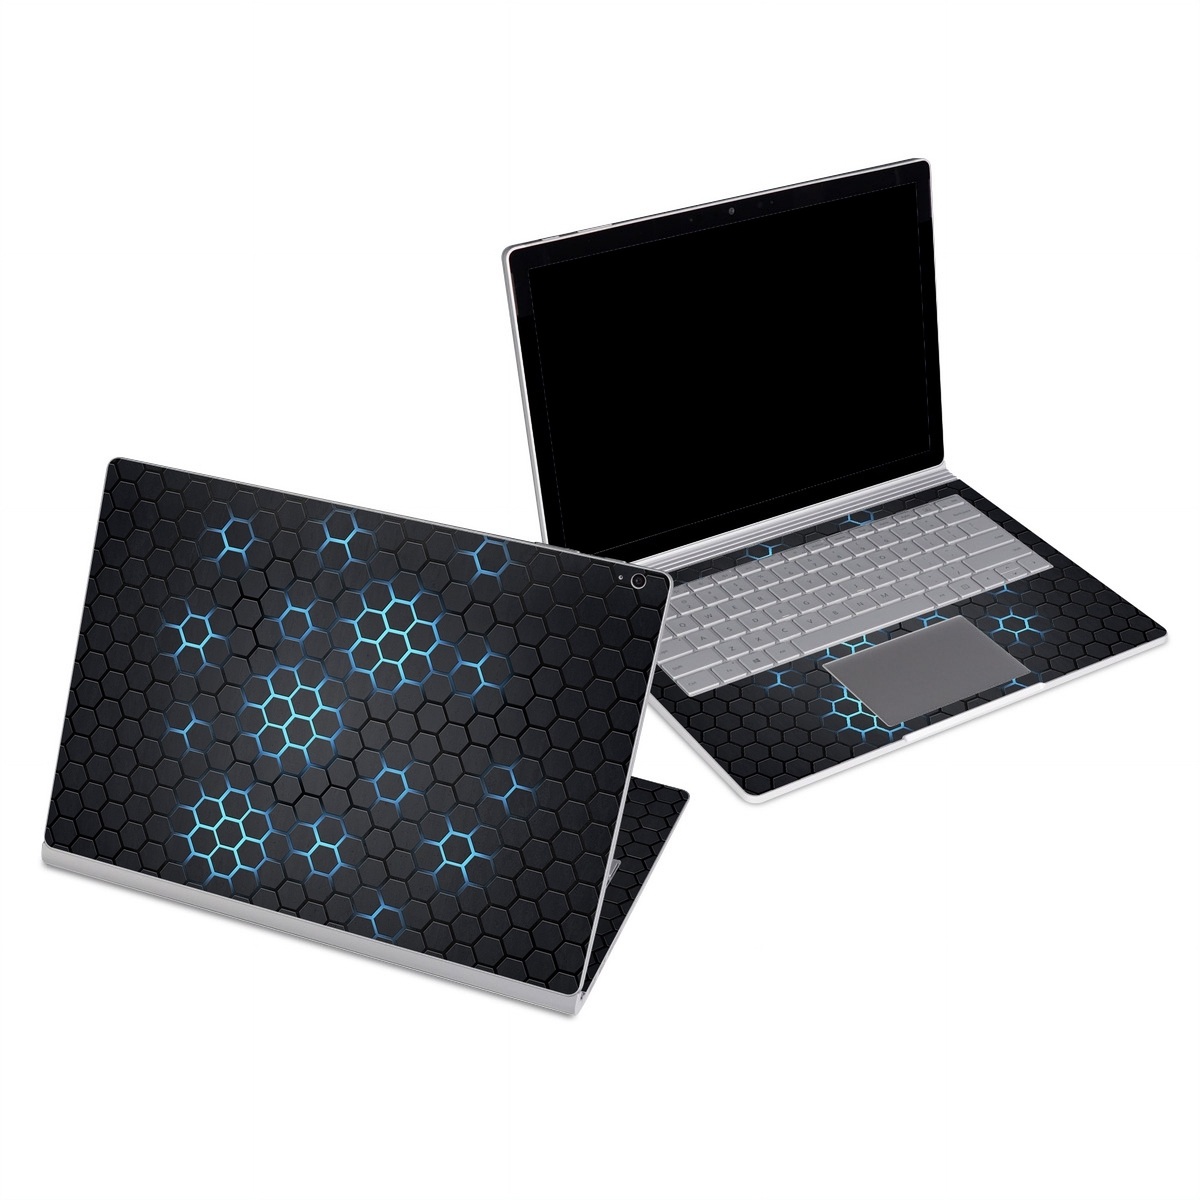 Microsoft Surface Book Series Skin design of Pattern, Water, Design, Circle, Metal, Mesh, Sphere, Symmetry, with black, gray, blue colors